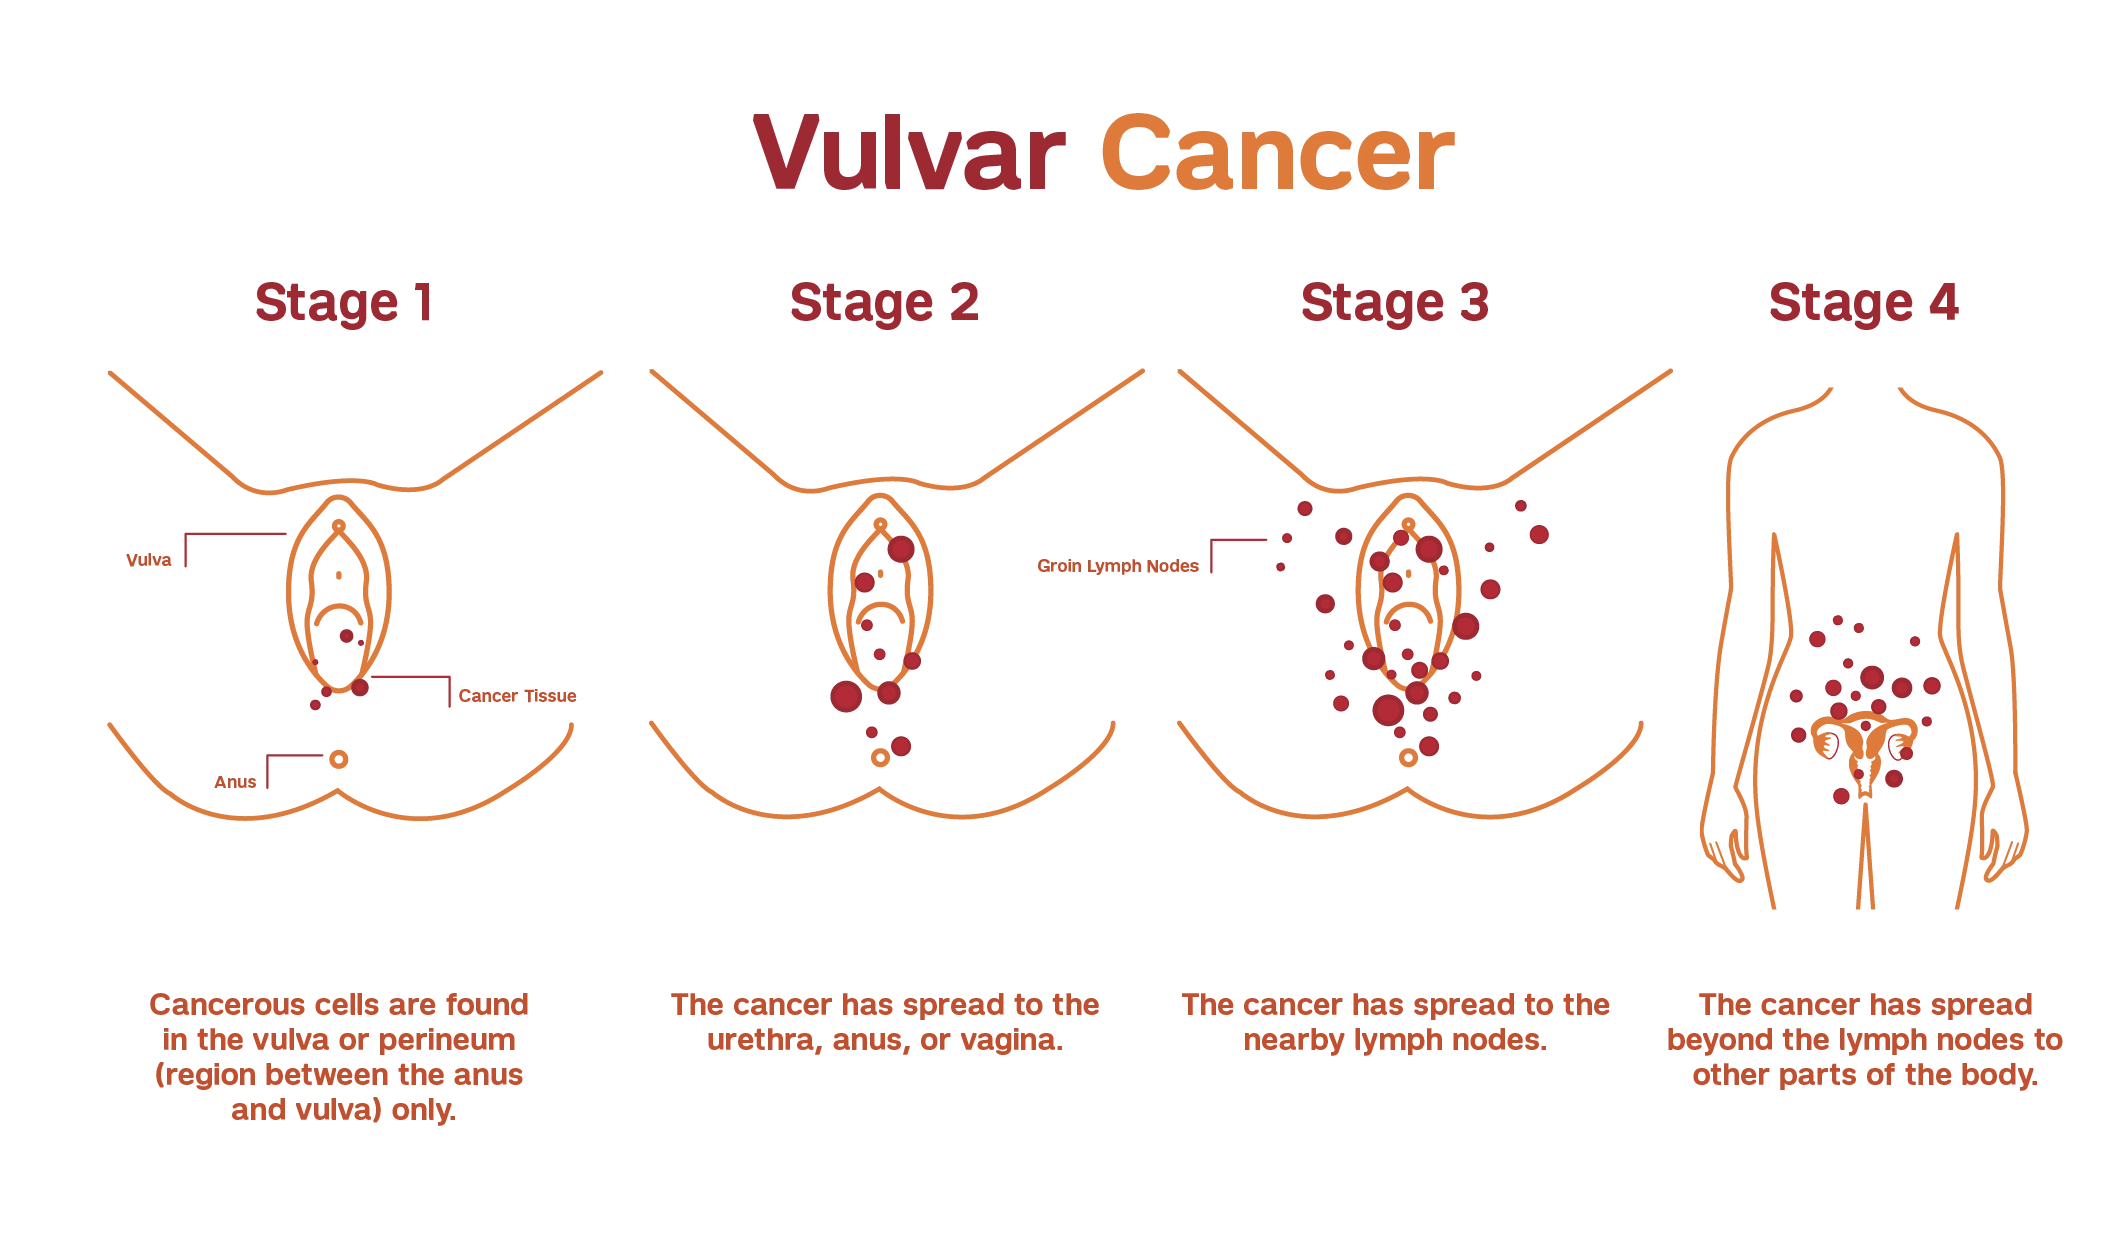 Diagnosis and Staging of Vulvar Cancer